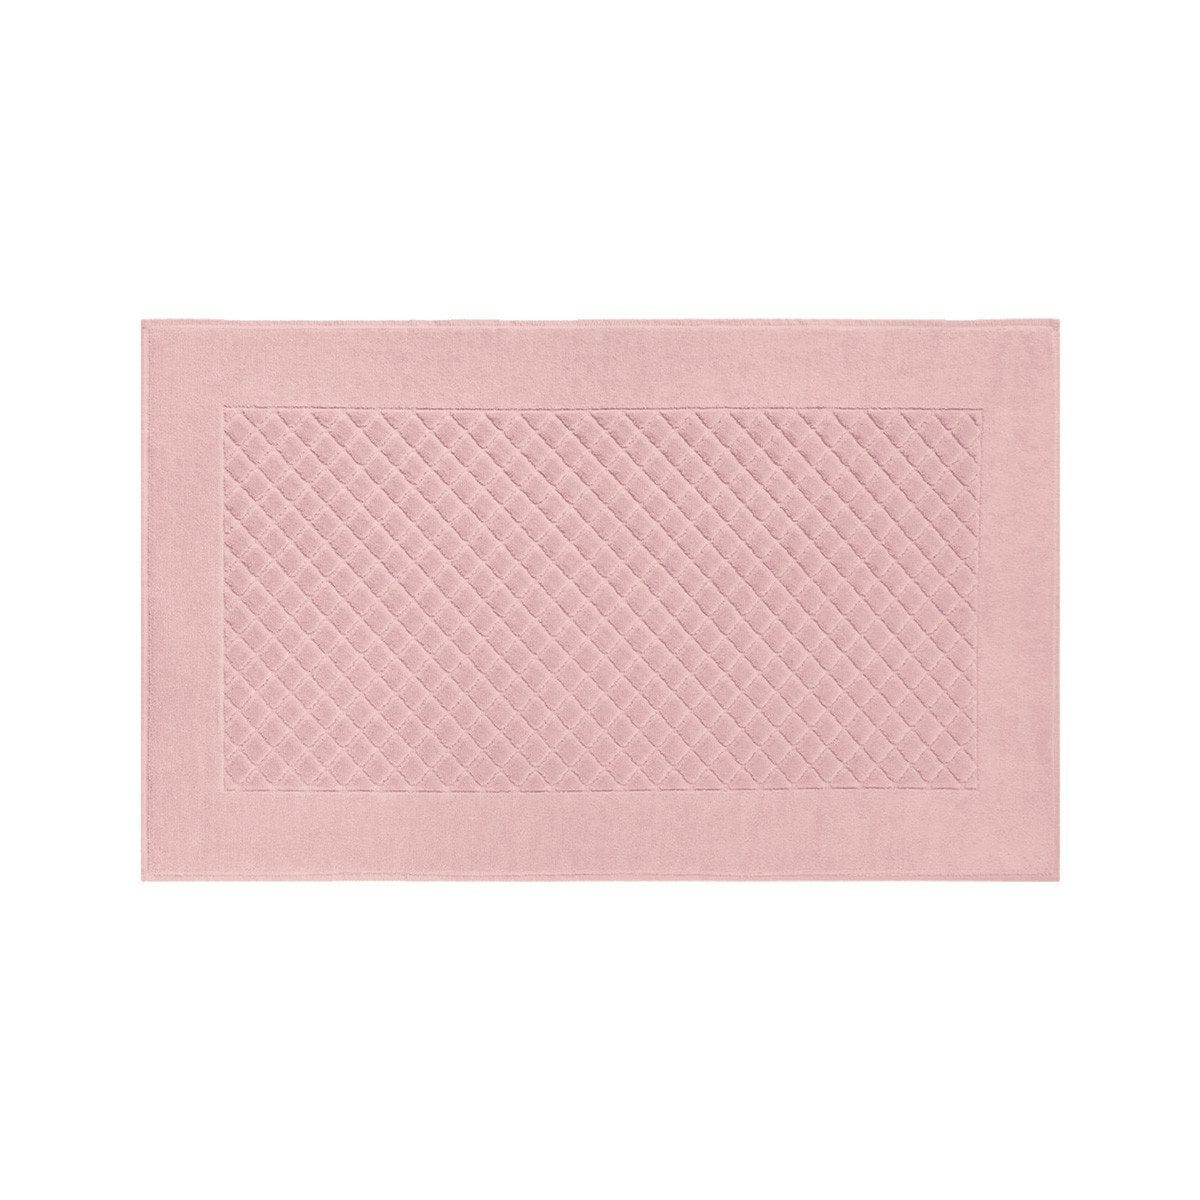 Mats & Rugs Etoile Bath Mat by Yves Delorme The Yves Delorme